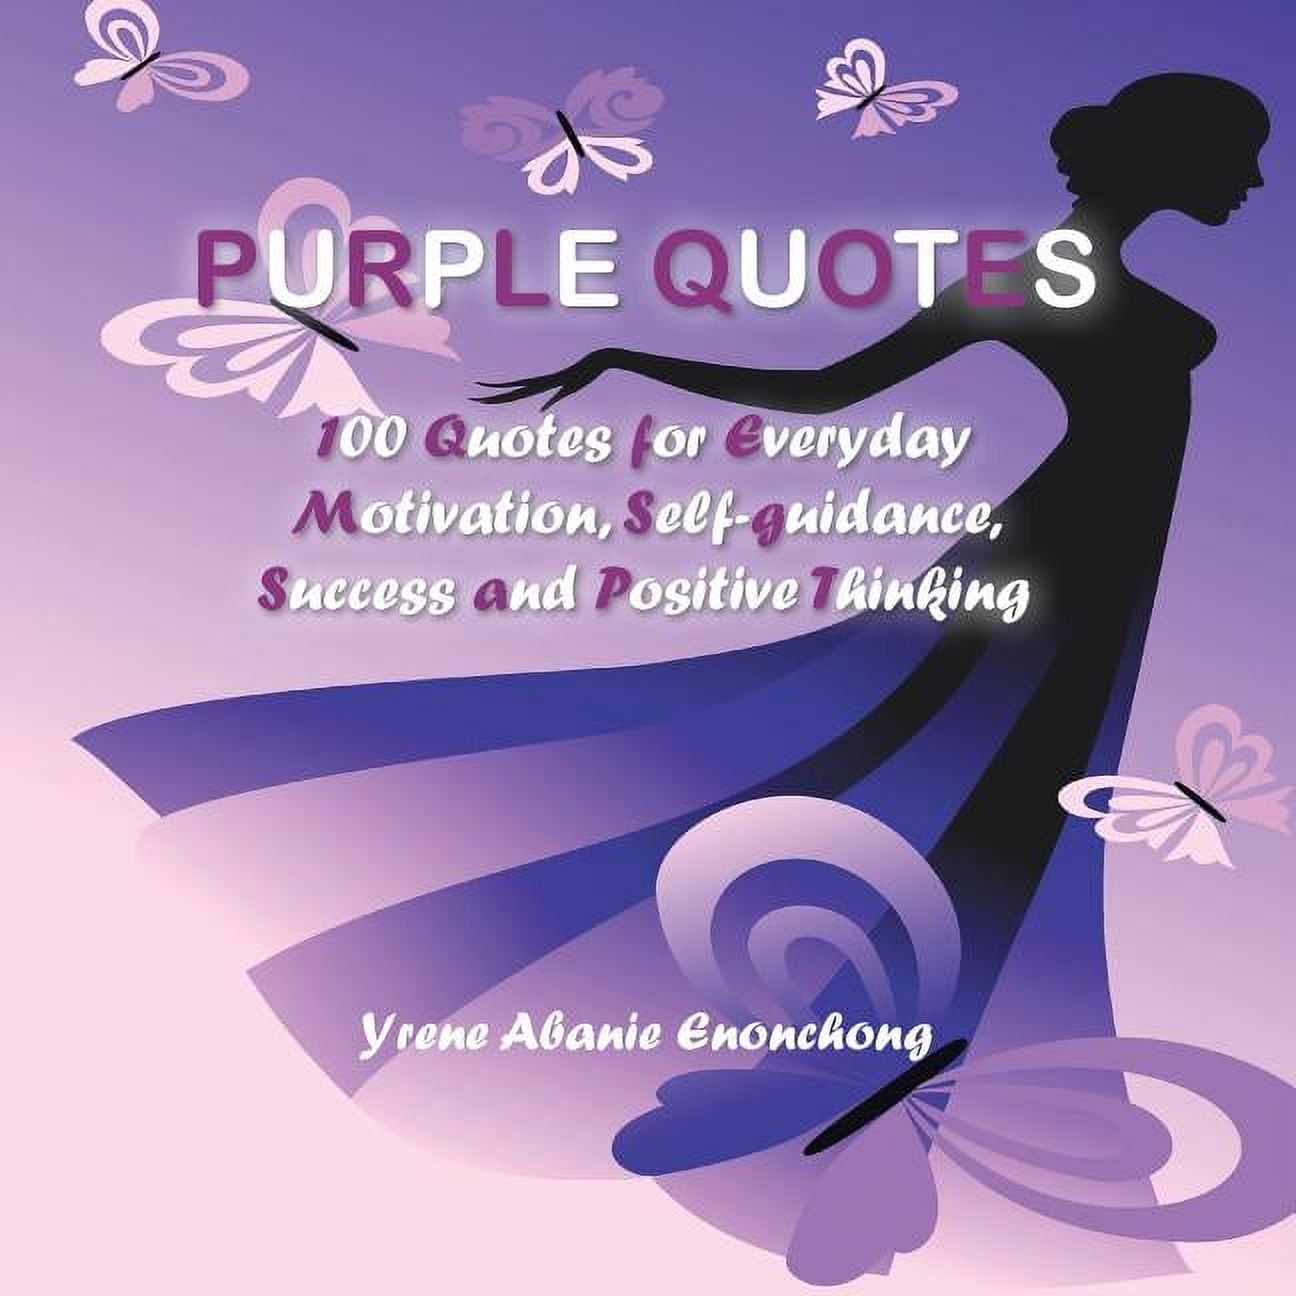 Purple Quotes: 100 Favorite Quotes to Uplift and Nurture Your Mind  (Paperback)